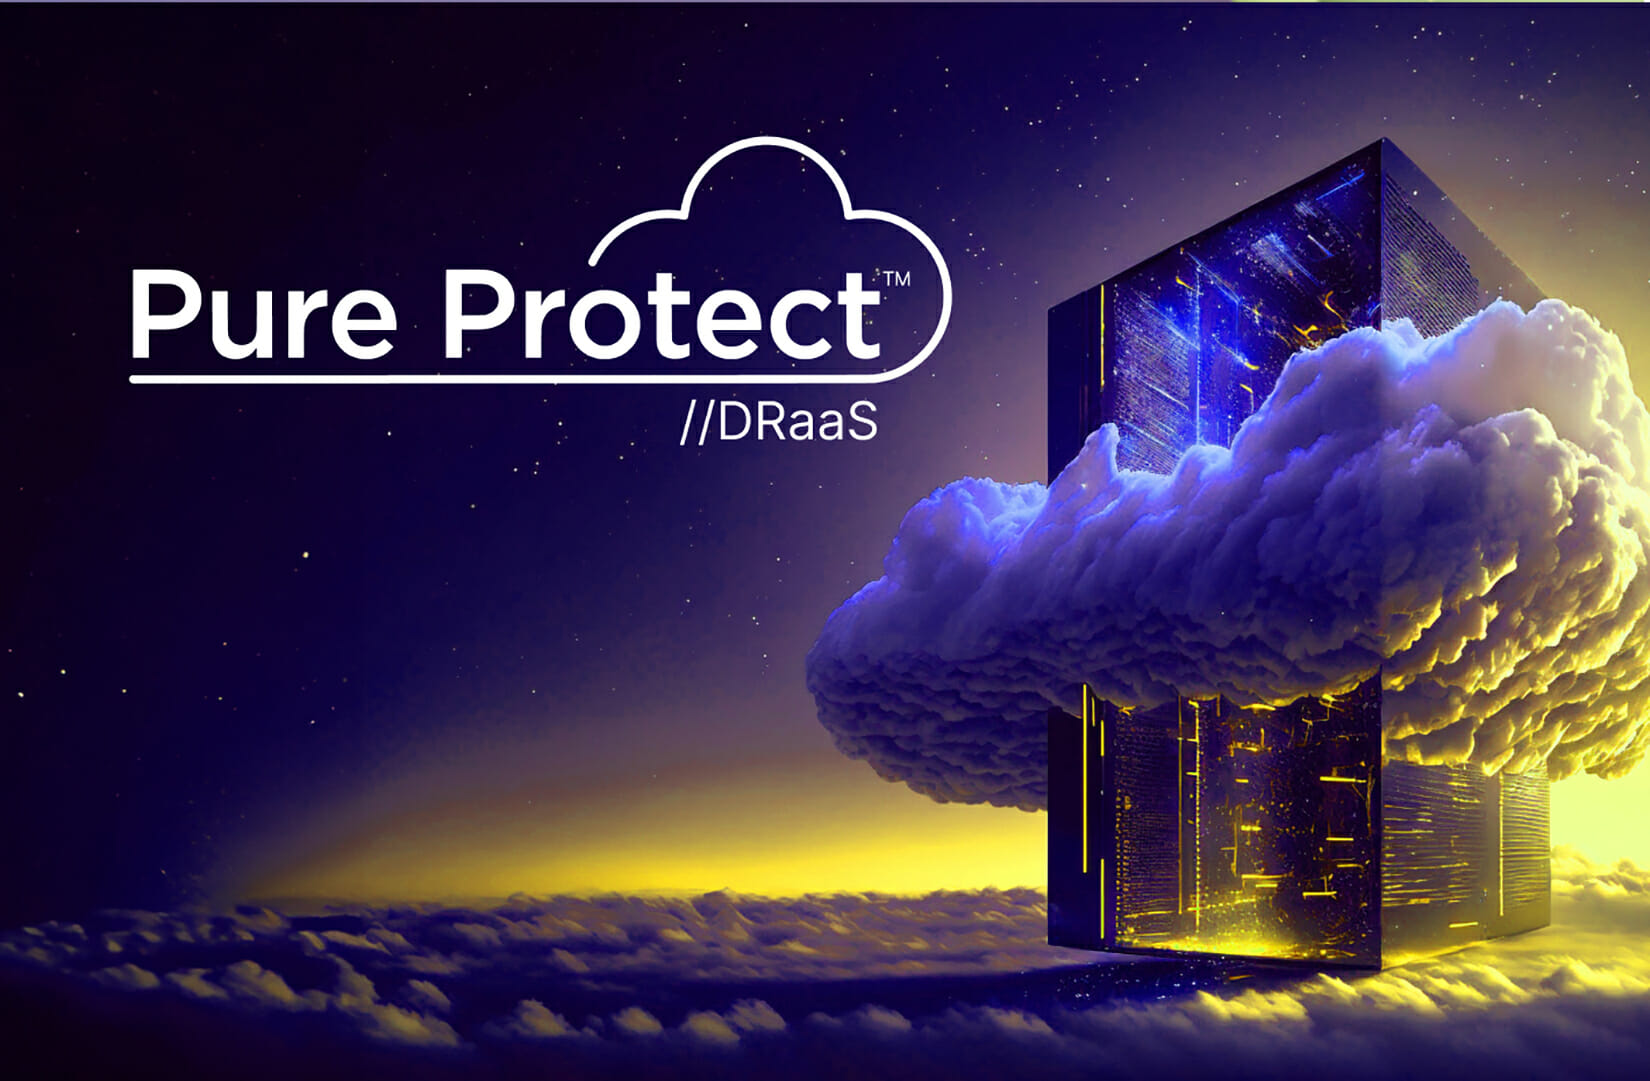 https://blog.purestorage.com/wp-content/uploads/2023/10/TSK-7756_BLOG_Introducing-Pure-Protect-Disaster-Recovery-as-a-Service_MOCKUP_03.jpg